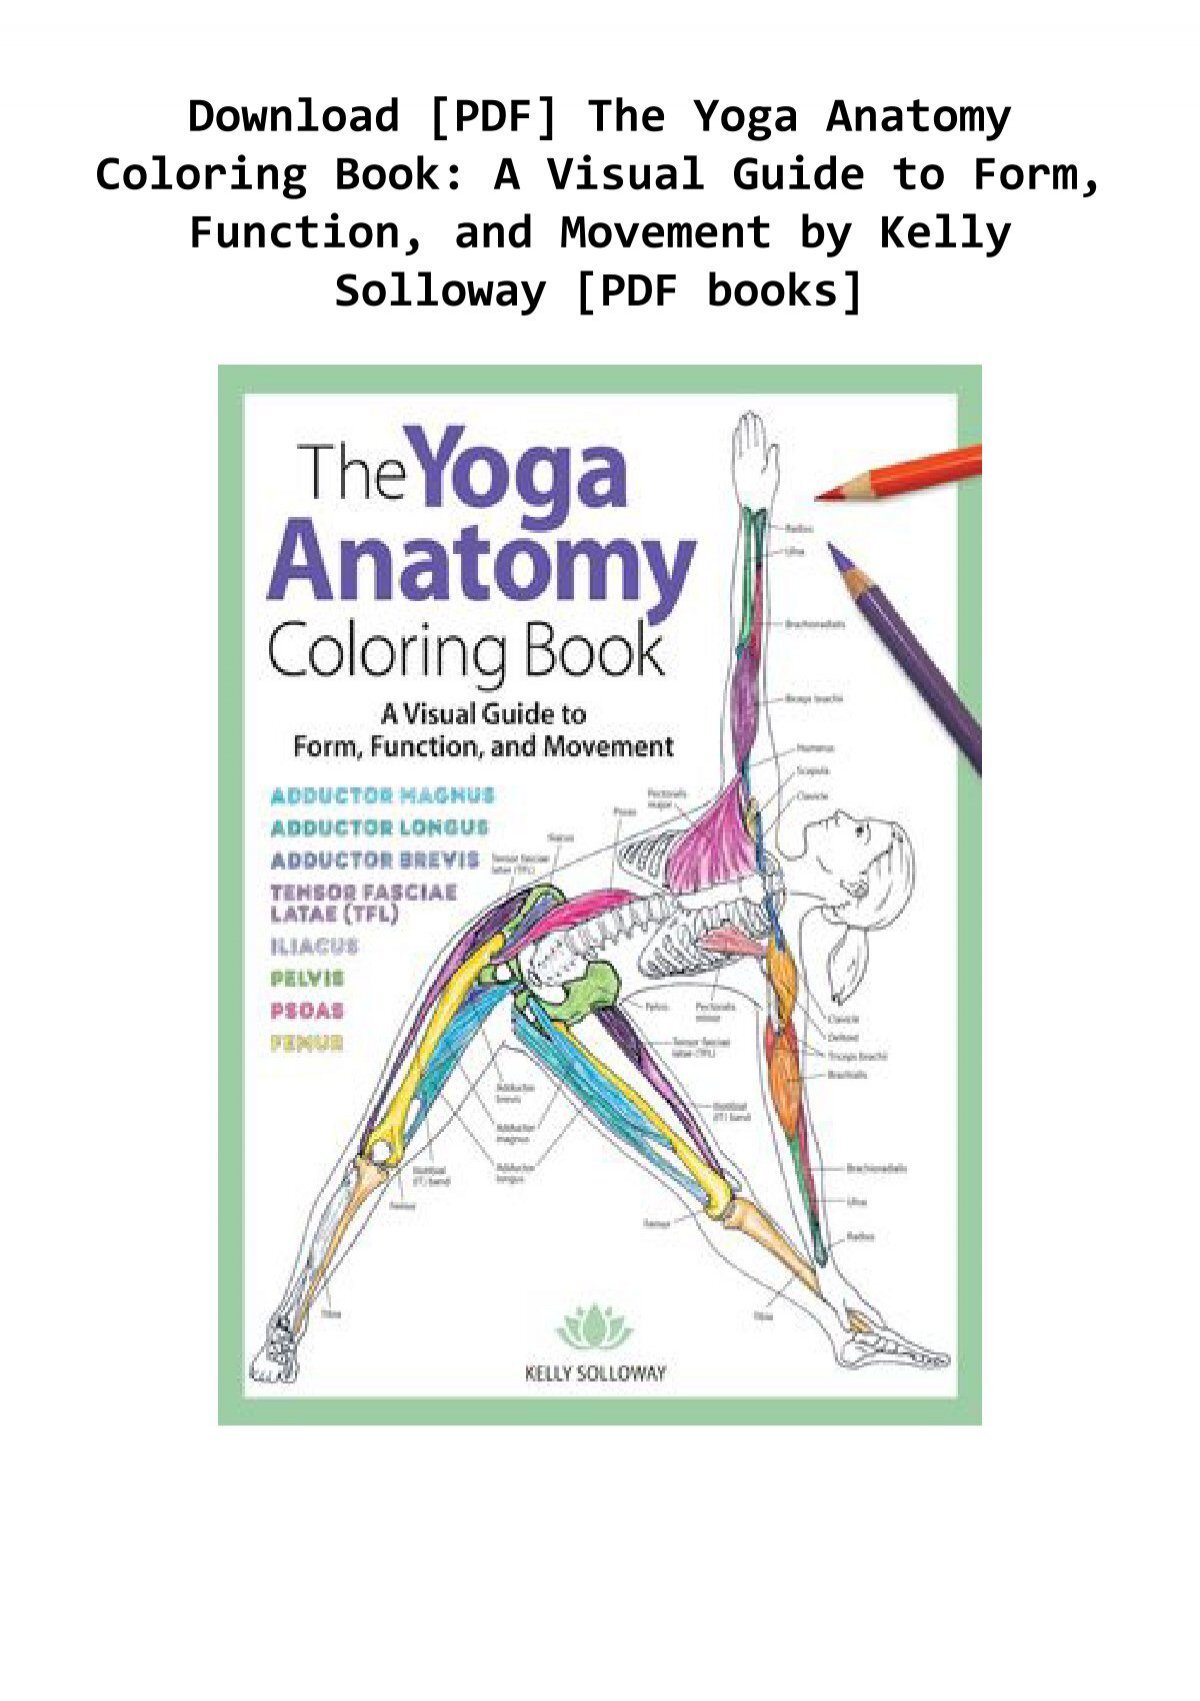 Download Download Pdf The Yoga Anatomy Coloring Book A Visual Guide To Form Function And Movement By Kelly Solloway Pdf Books